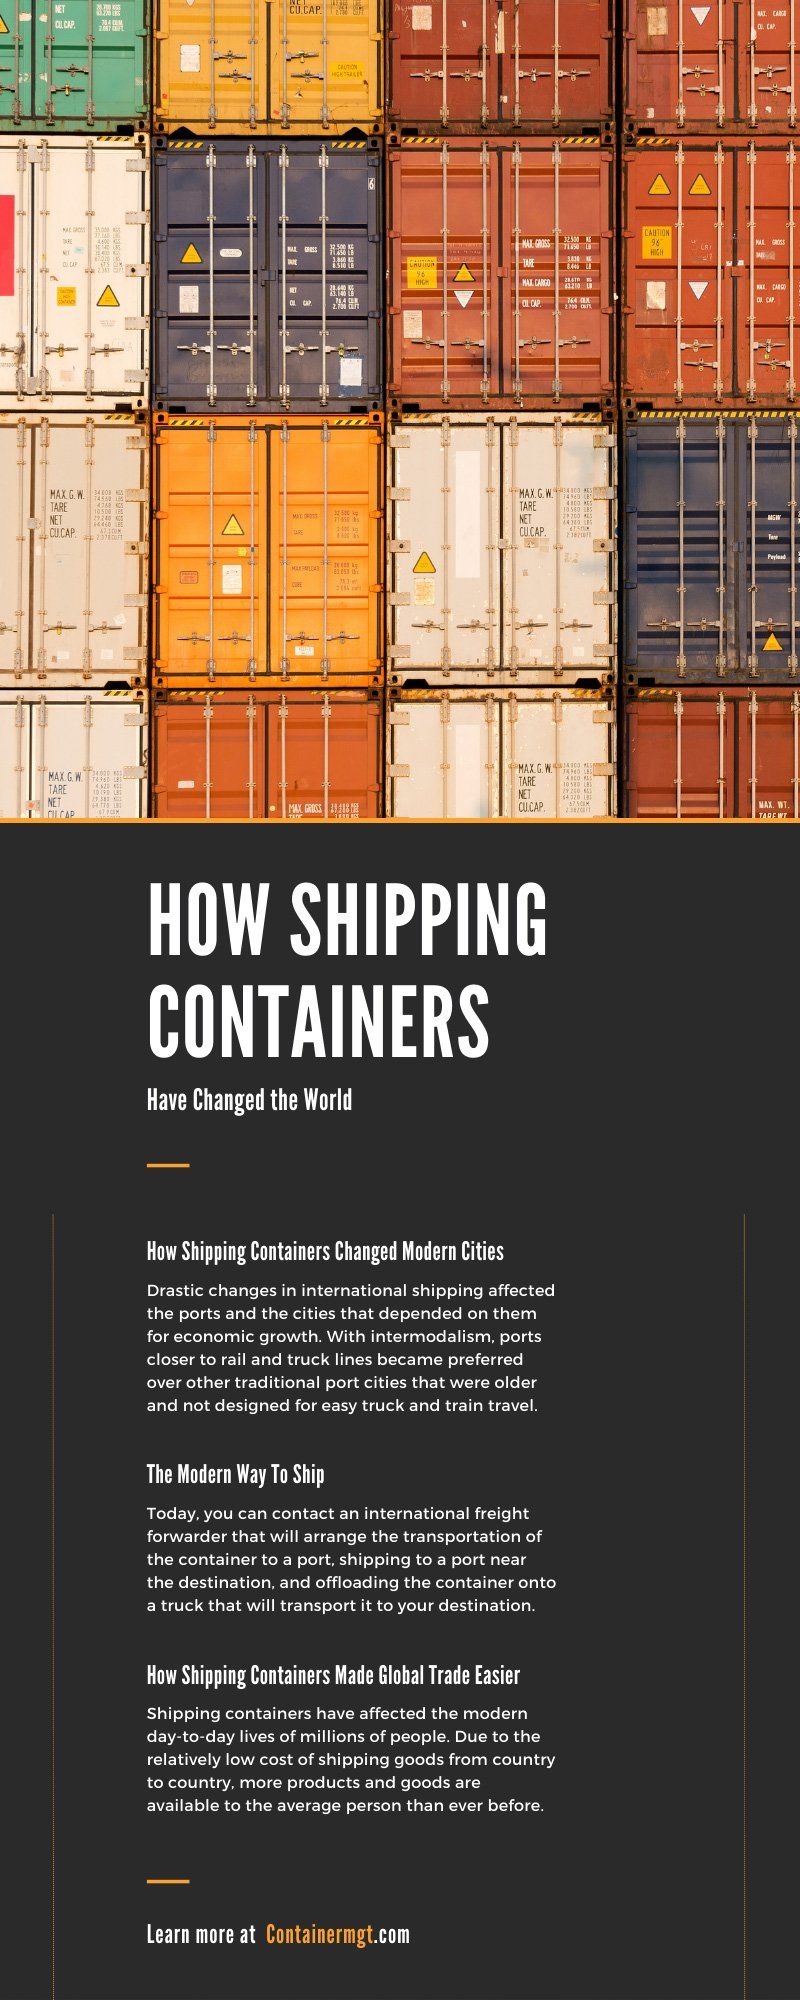 How Shipping Containers Have Changed the World